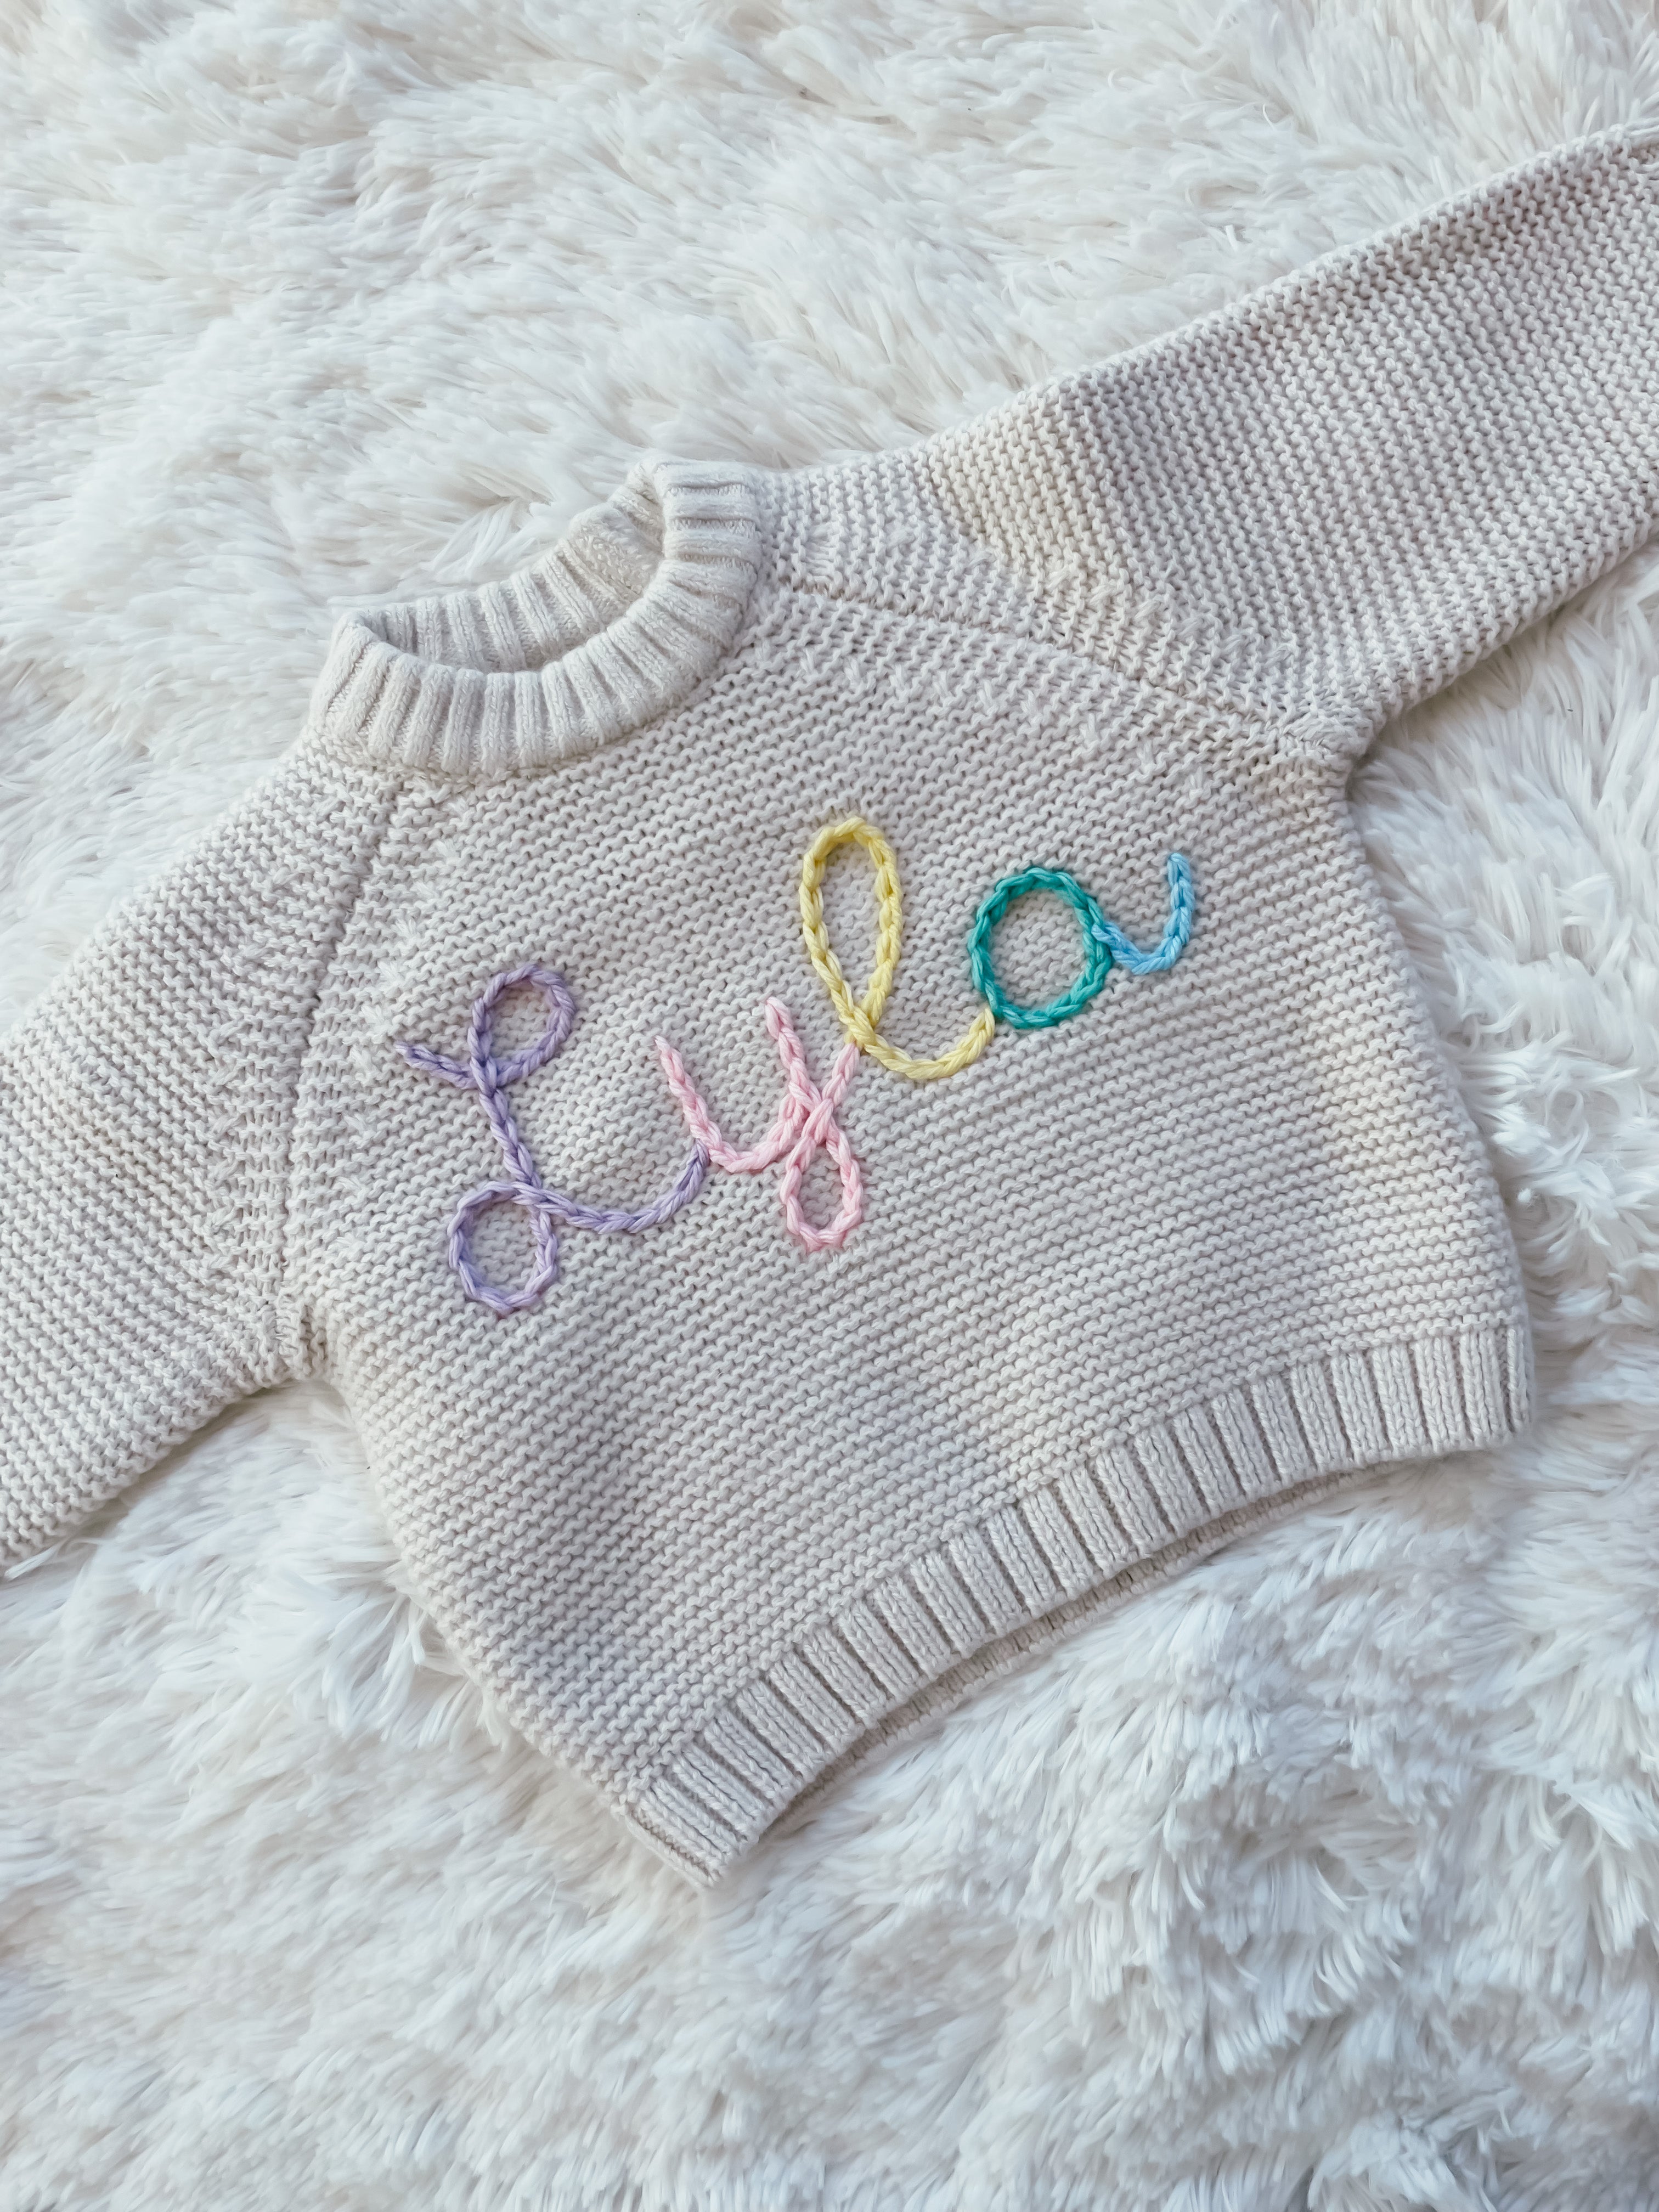 Bespoke Baby + Toddler Sweaters *6-9 Months Only*